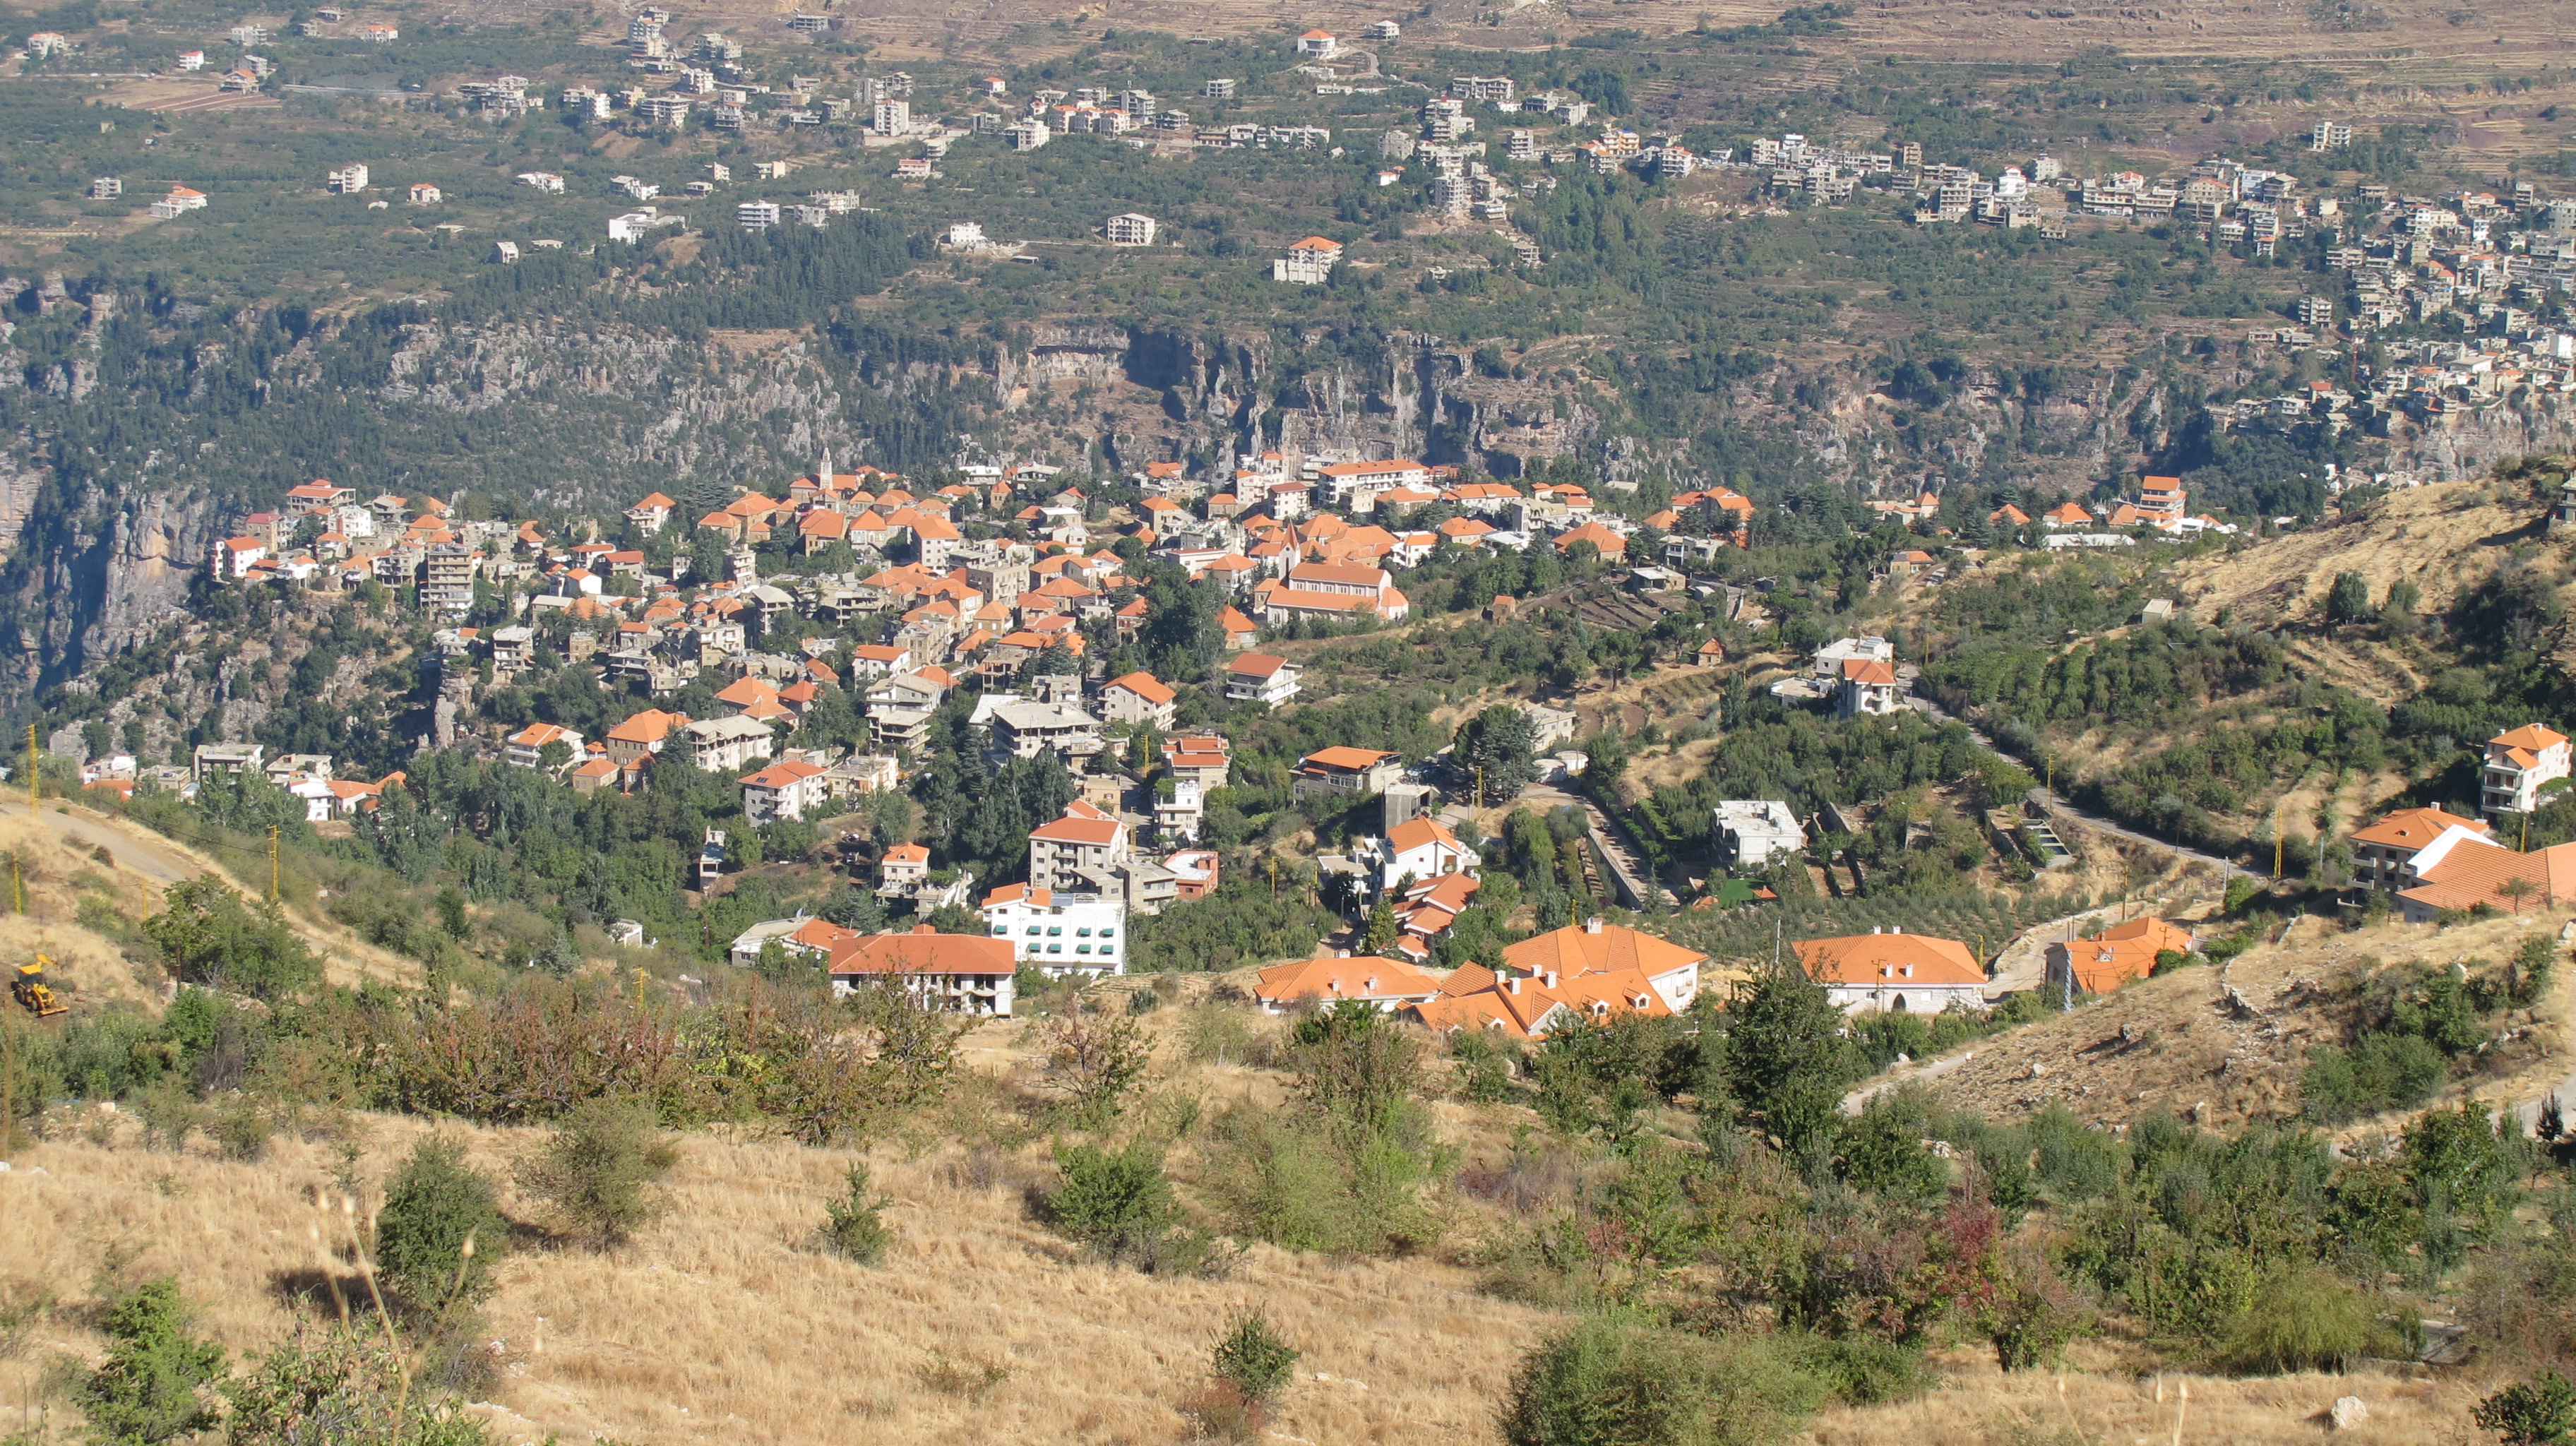 A view from high above of the red roofs of Hasroun